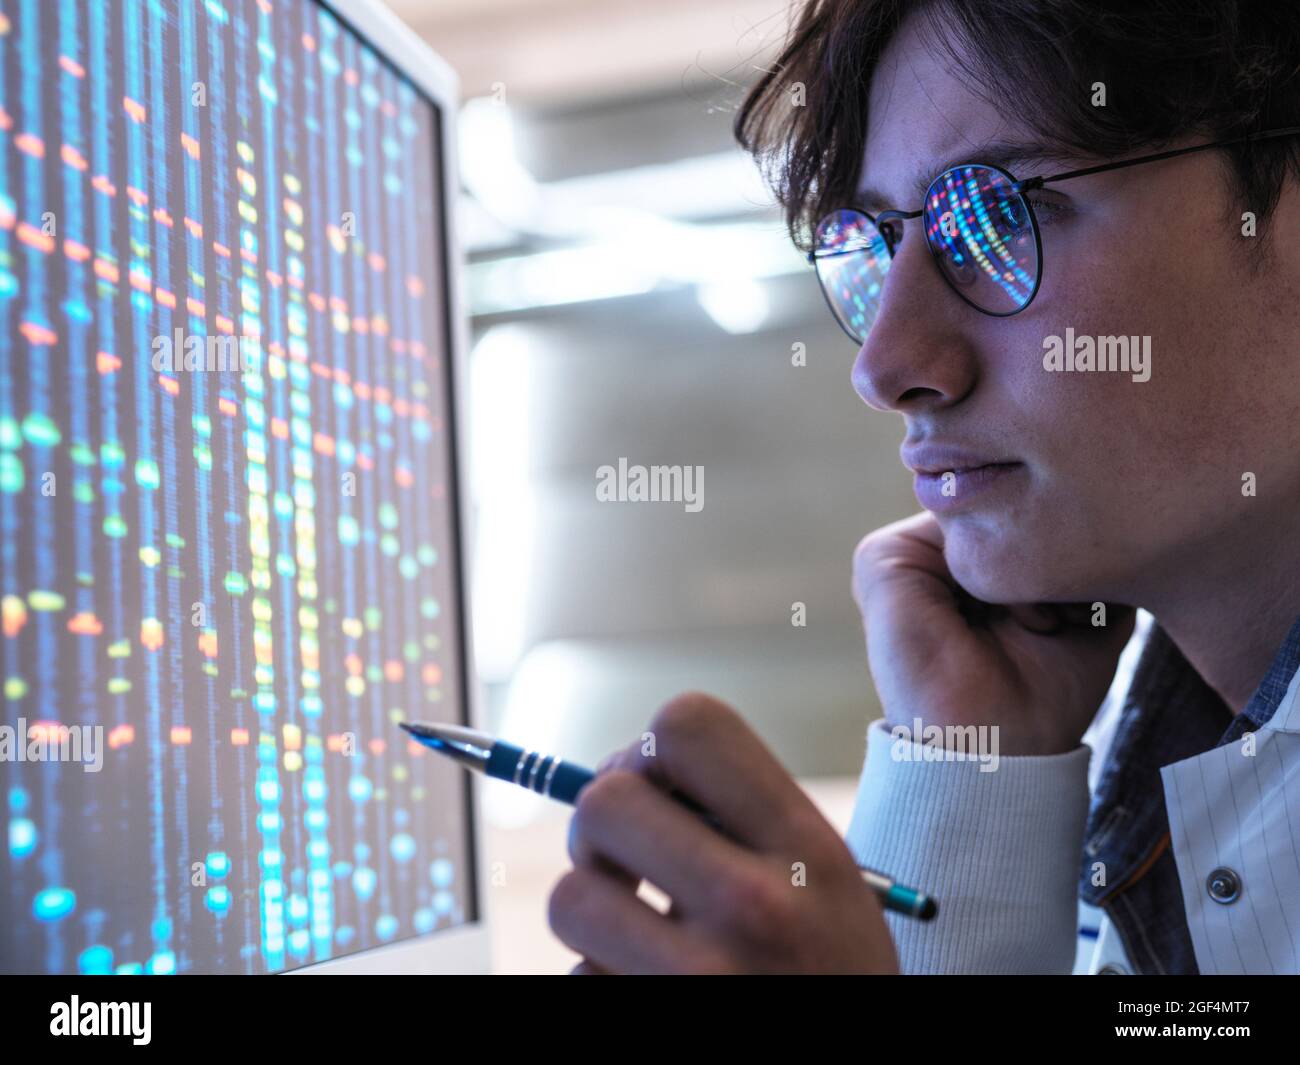 Male teenage expert analyzing DNA through computer at laboratory Stock Photo